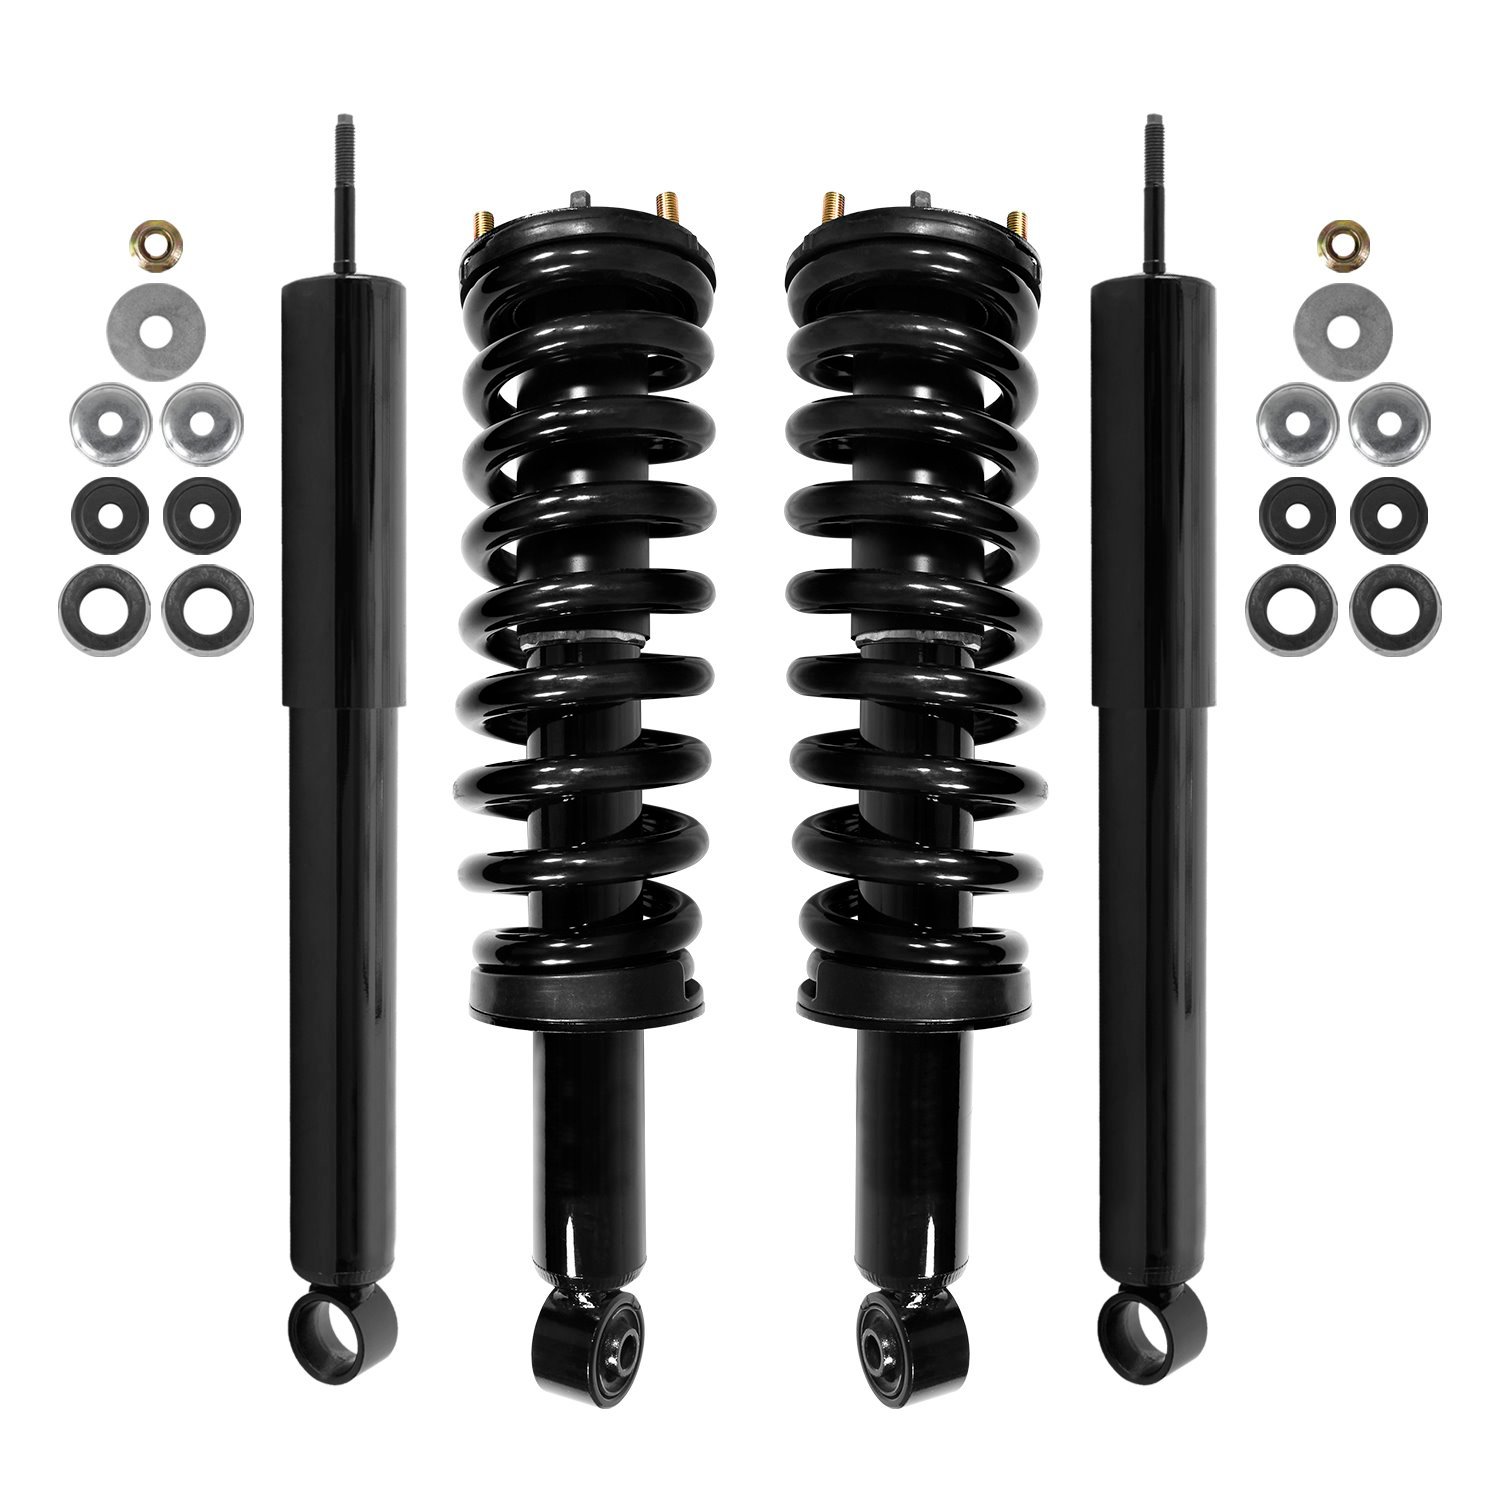 4-11561-254010-001 Front & Rear Suspension Strut & Coil Spring Assembly Fits Select Toyota 4Runner